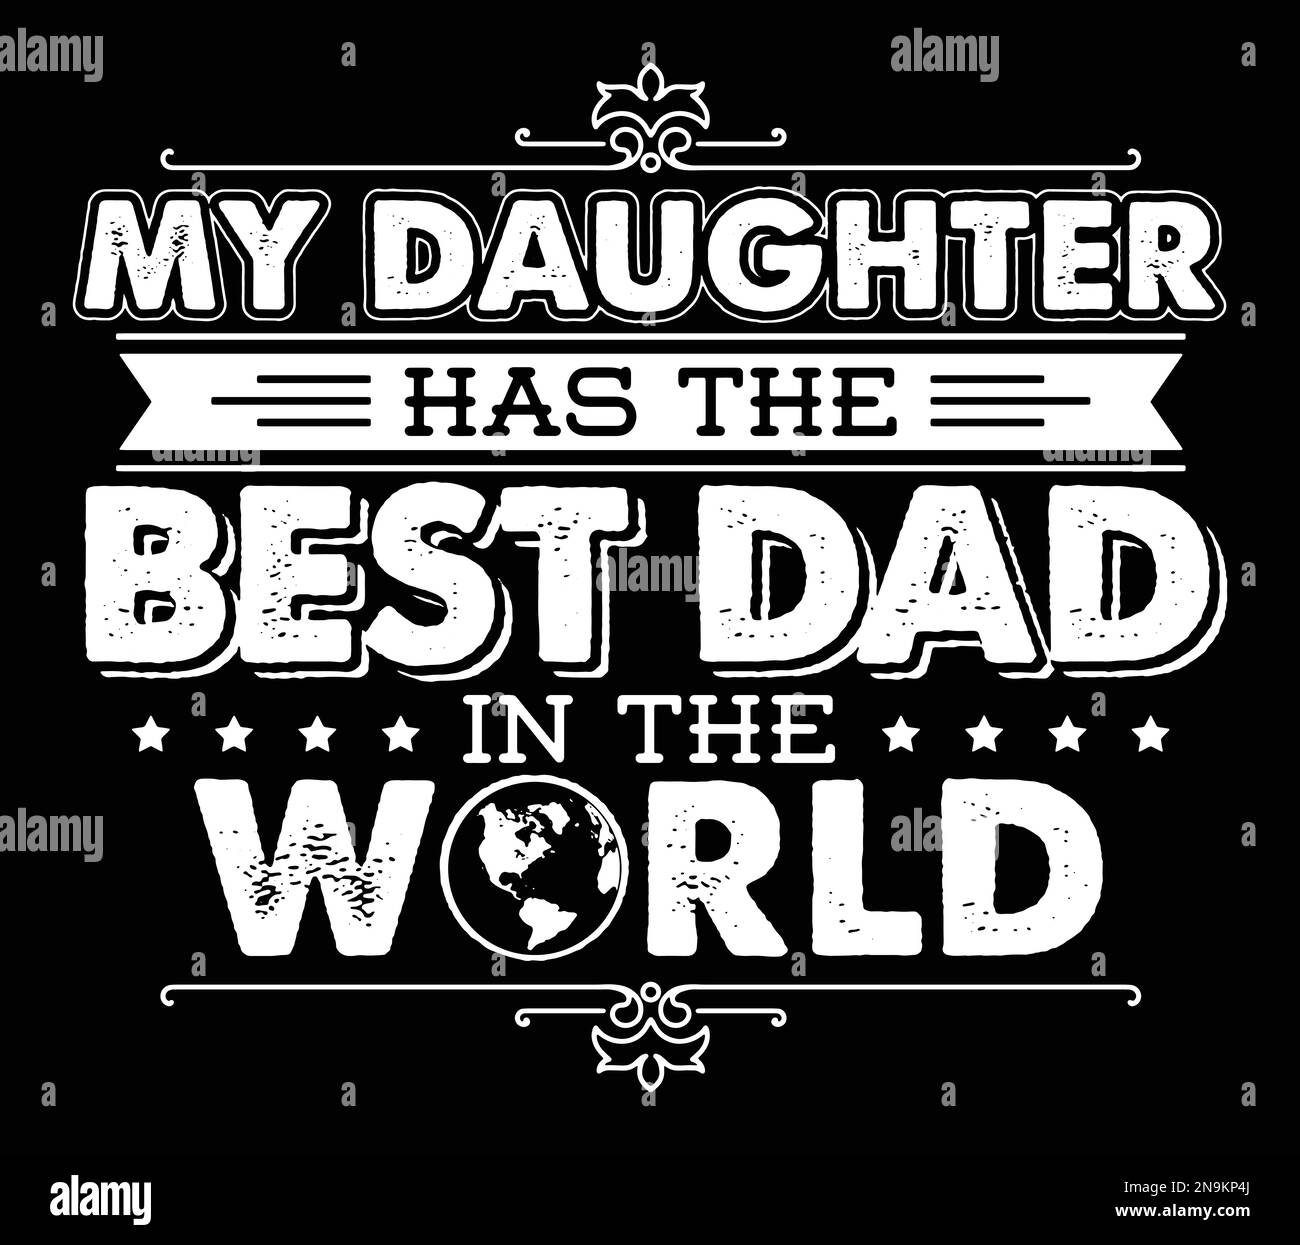 My daughter has the best dad in the world. Stock Vector